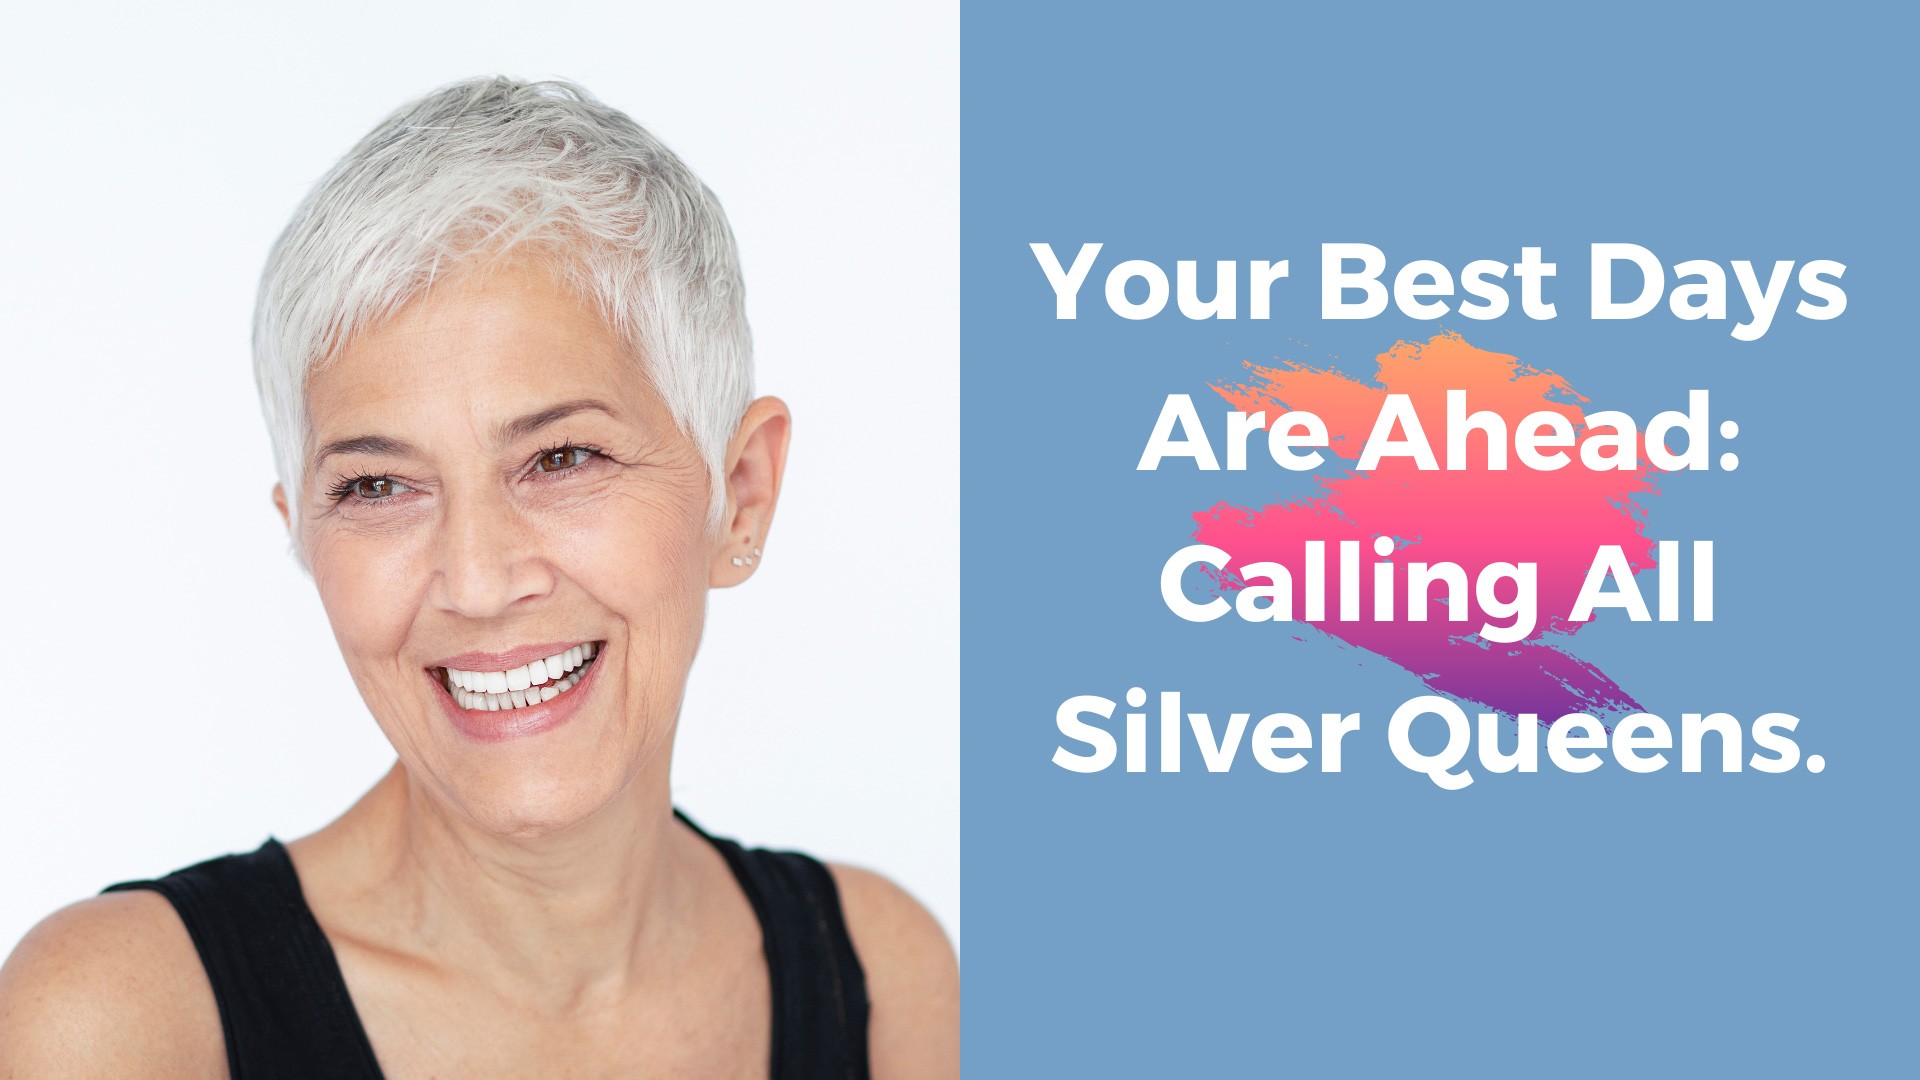 Calling All Silver Queens